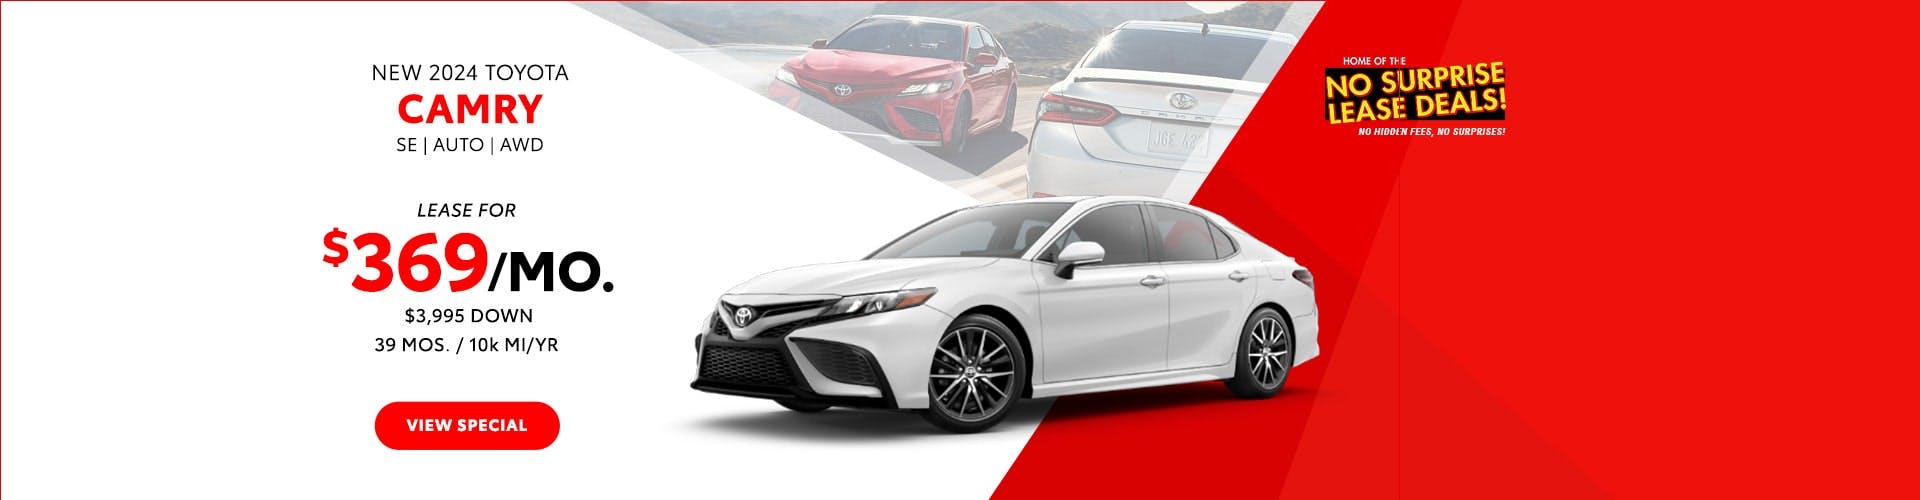 Camry No Surprise Lease Deal